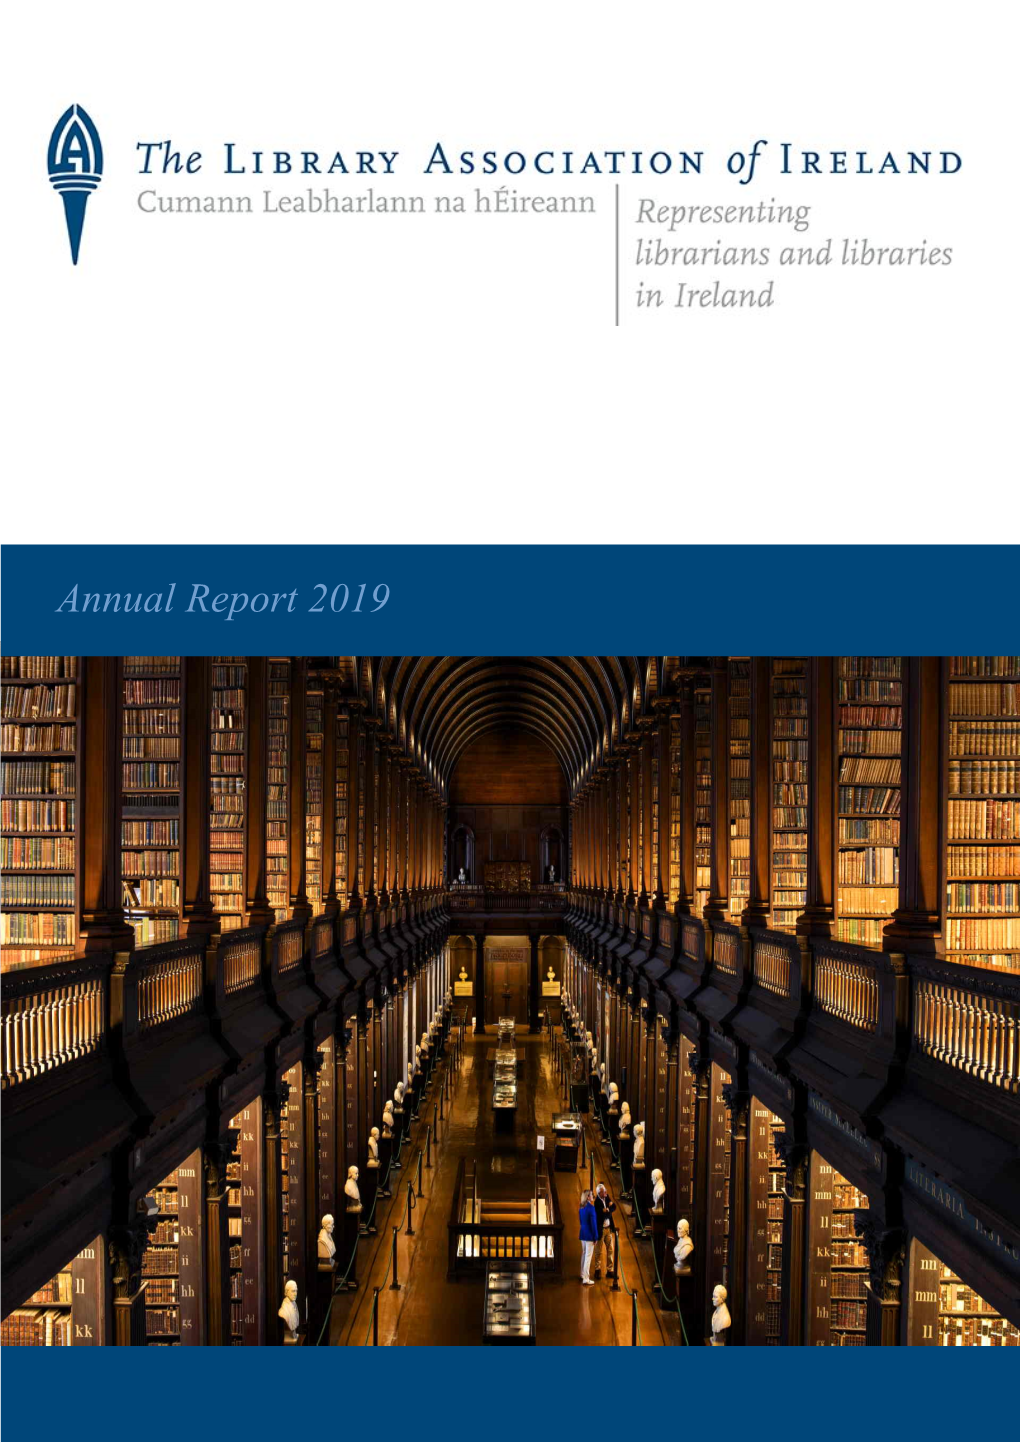 Library Association of Ireland Annual Report 2019